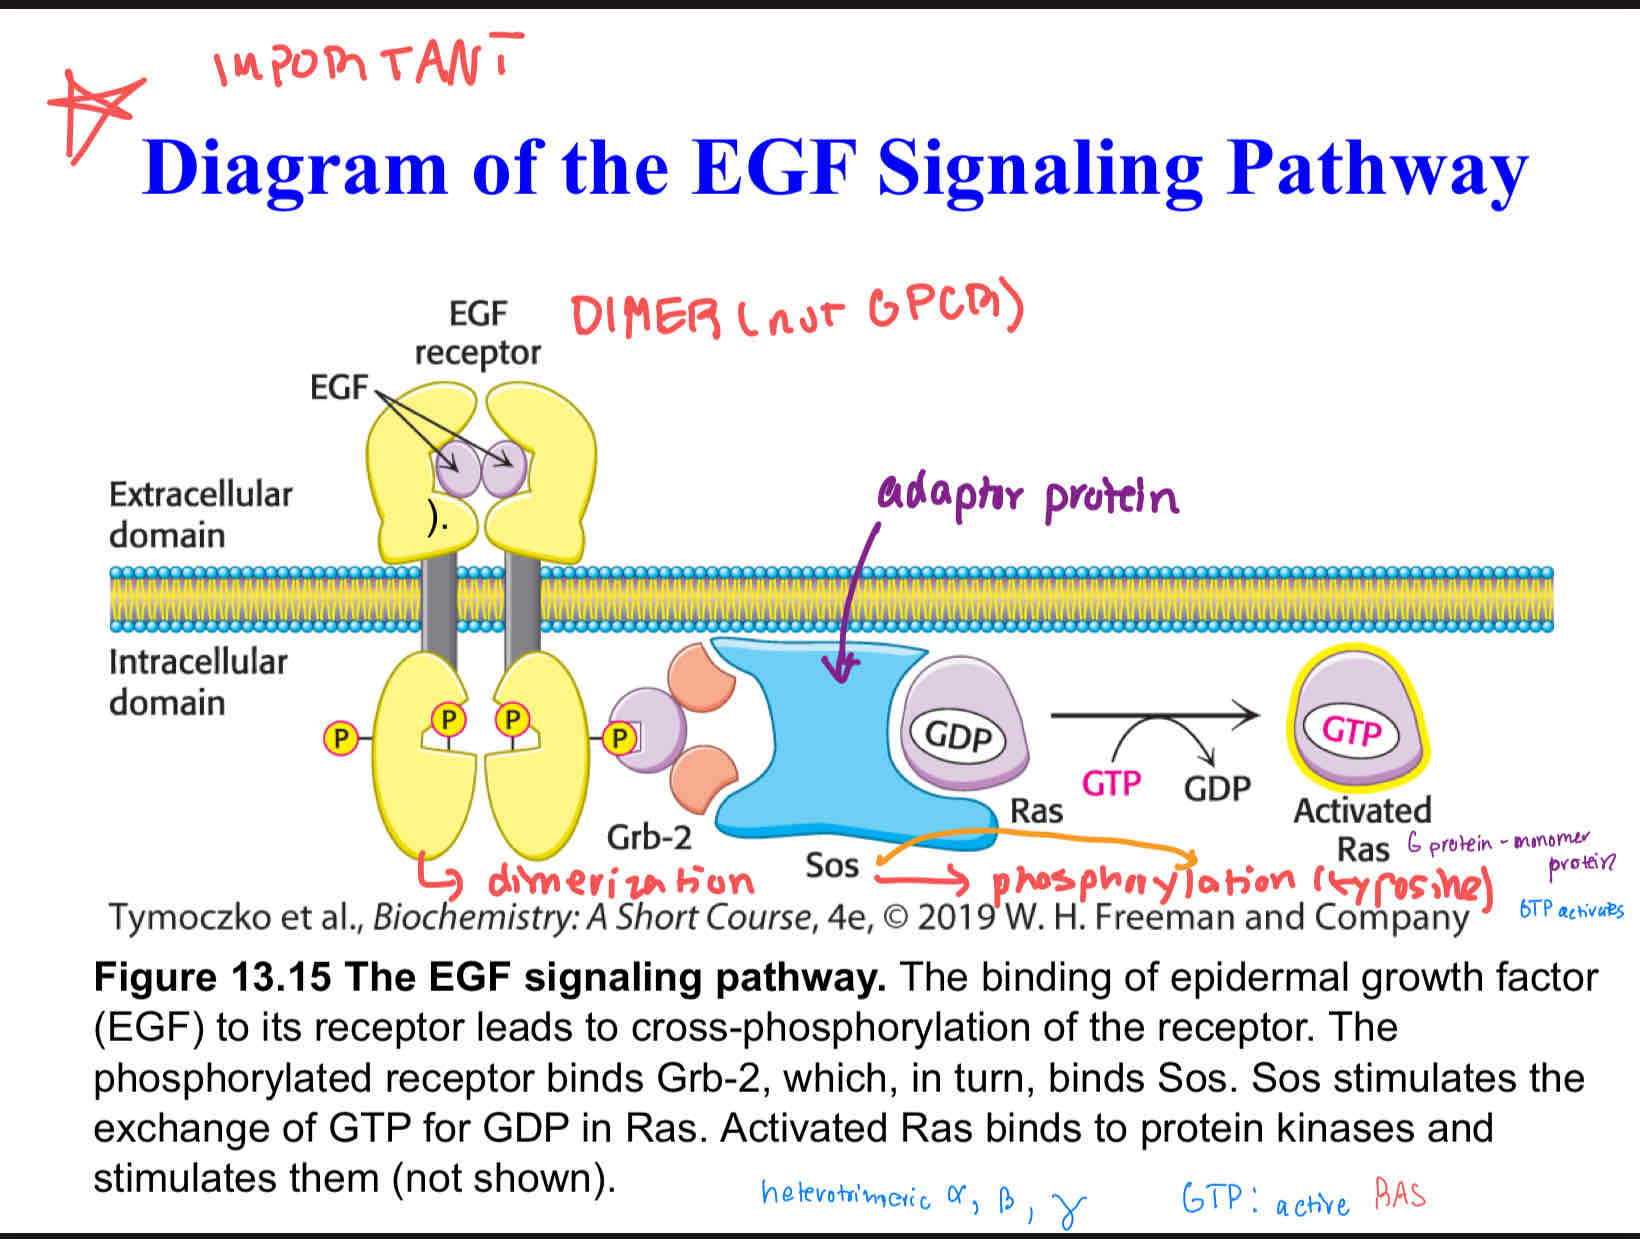 <p>EGF Signaling Pathway.</p><p>the binding of epidermal growth factor (EGF) to its receptor leads to cross-phosphorylation of the receptor. The phosphorylated receptor binds Grb-2, which, in turn, binds Sos. Sos stimulates the exchange of GTP for GDP in Ras. Activated Ras binds to protein kinases and stimulates them (not shown).</p>